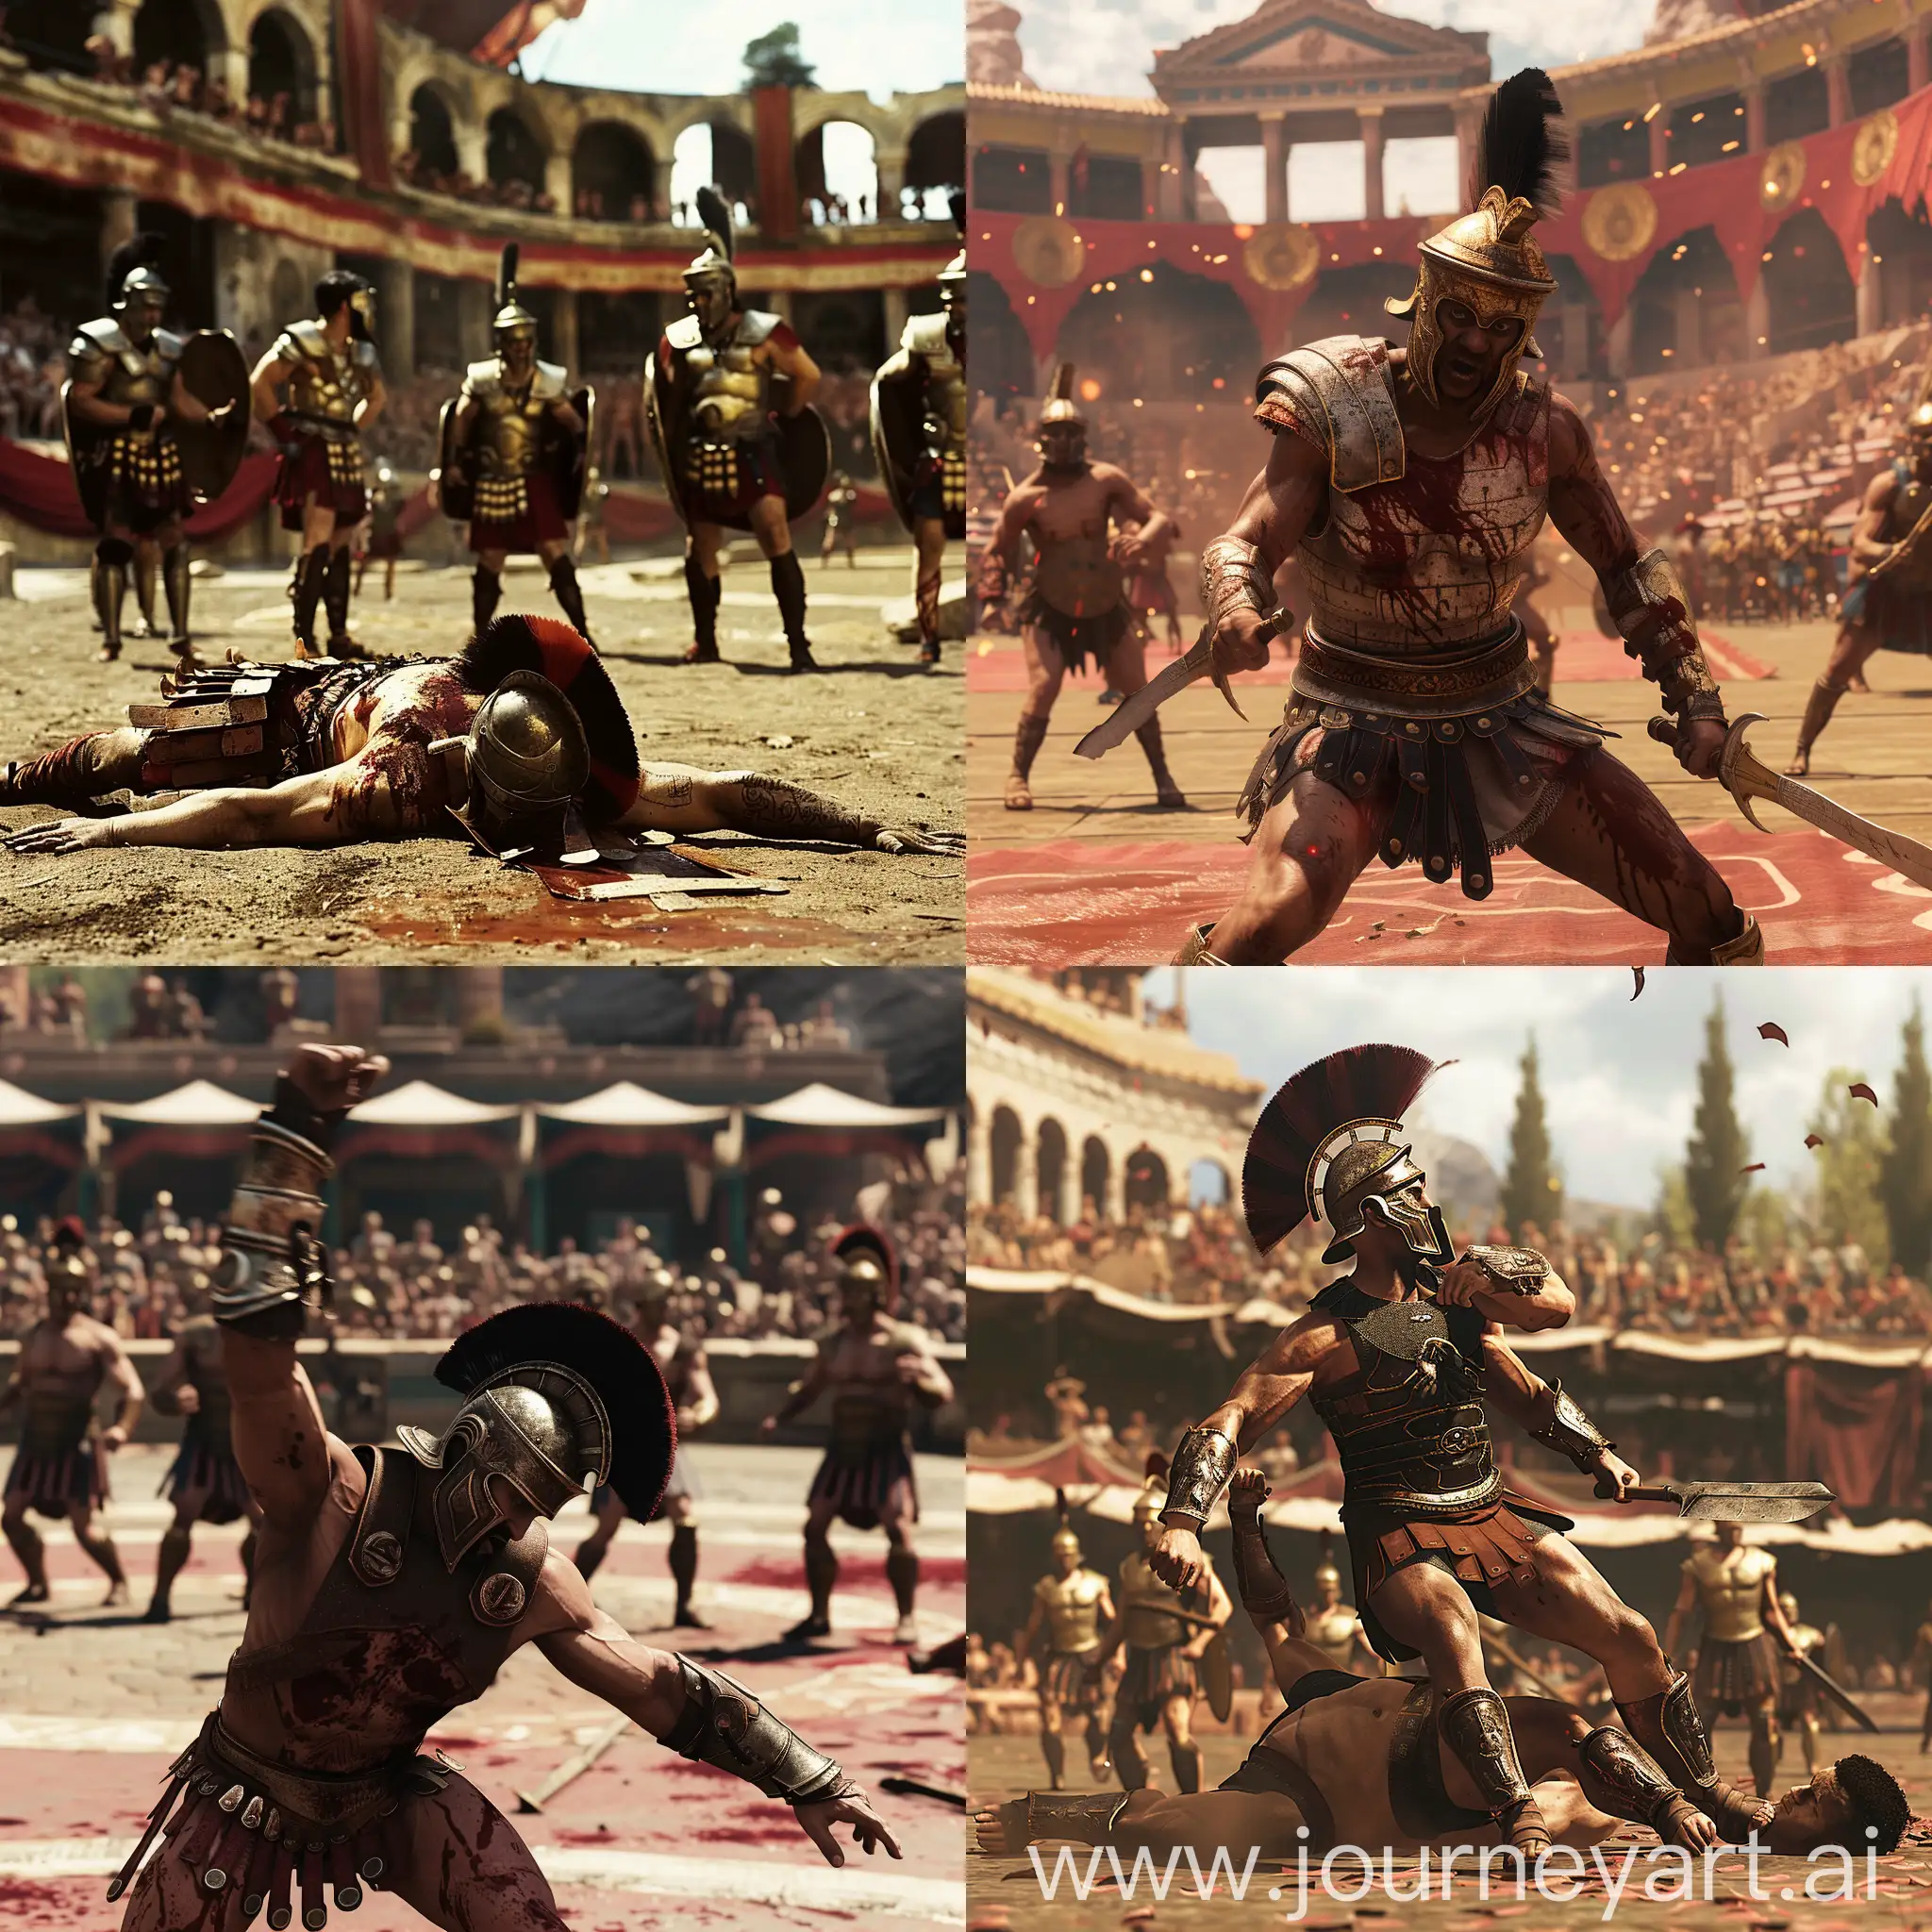 Dominant-Roman-Gladiator-Triumphs-Over-Seven-Foes-in-the-Arena